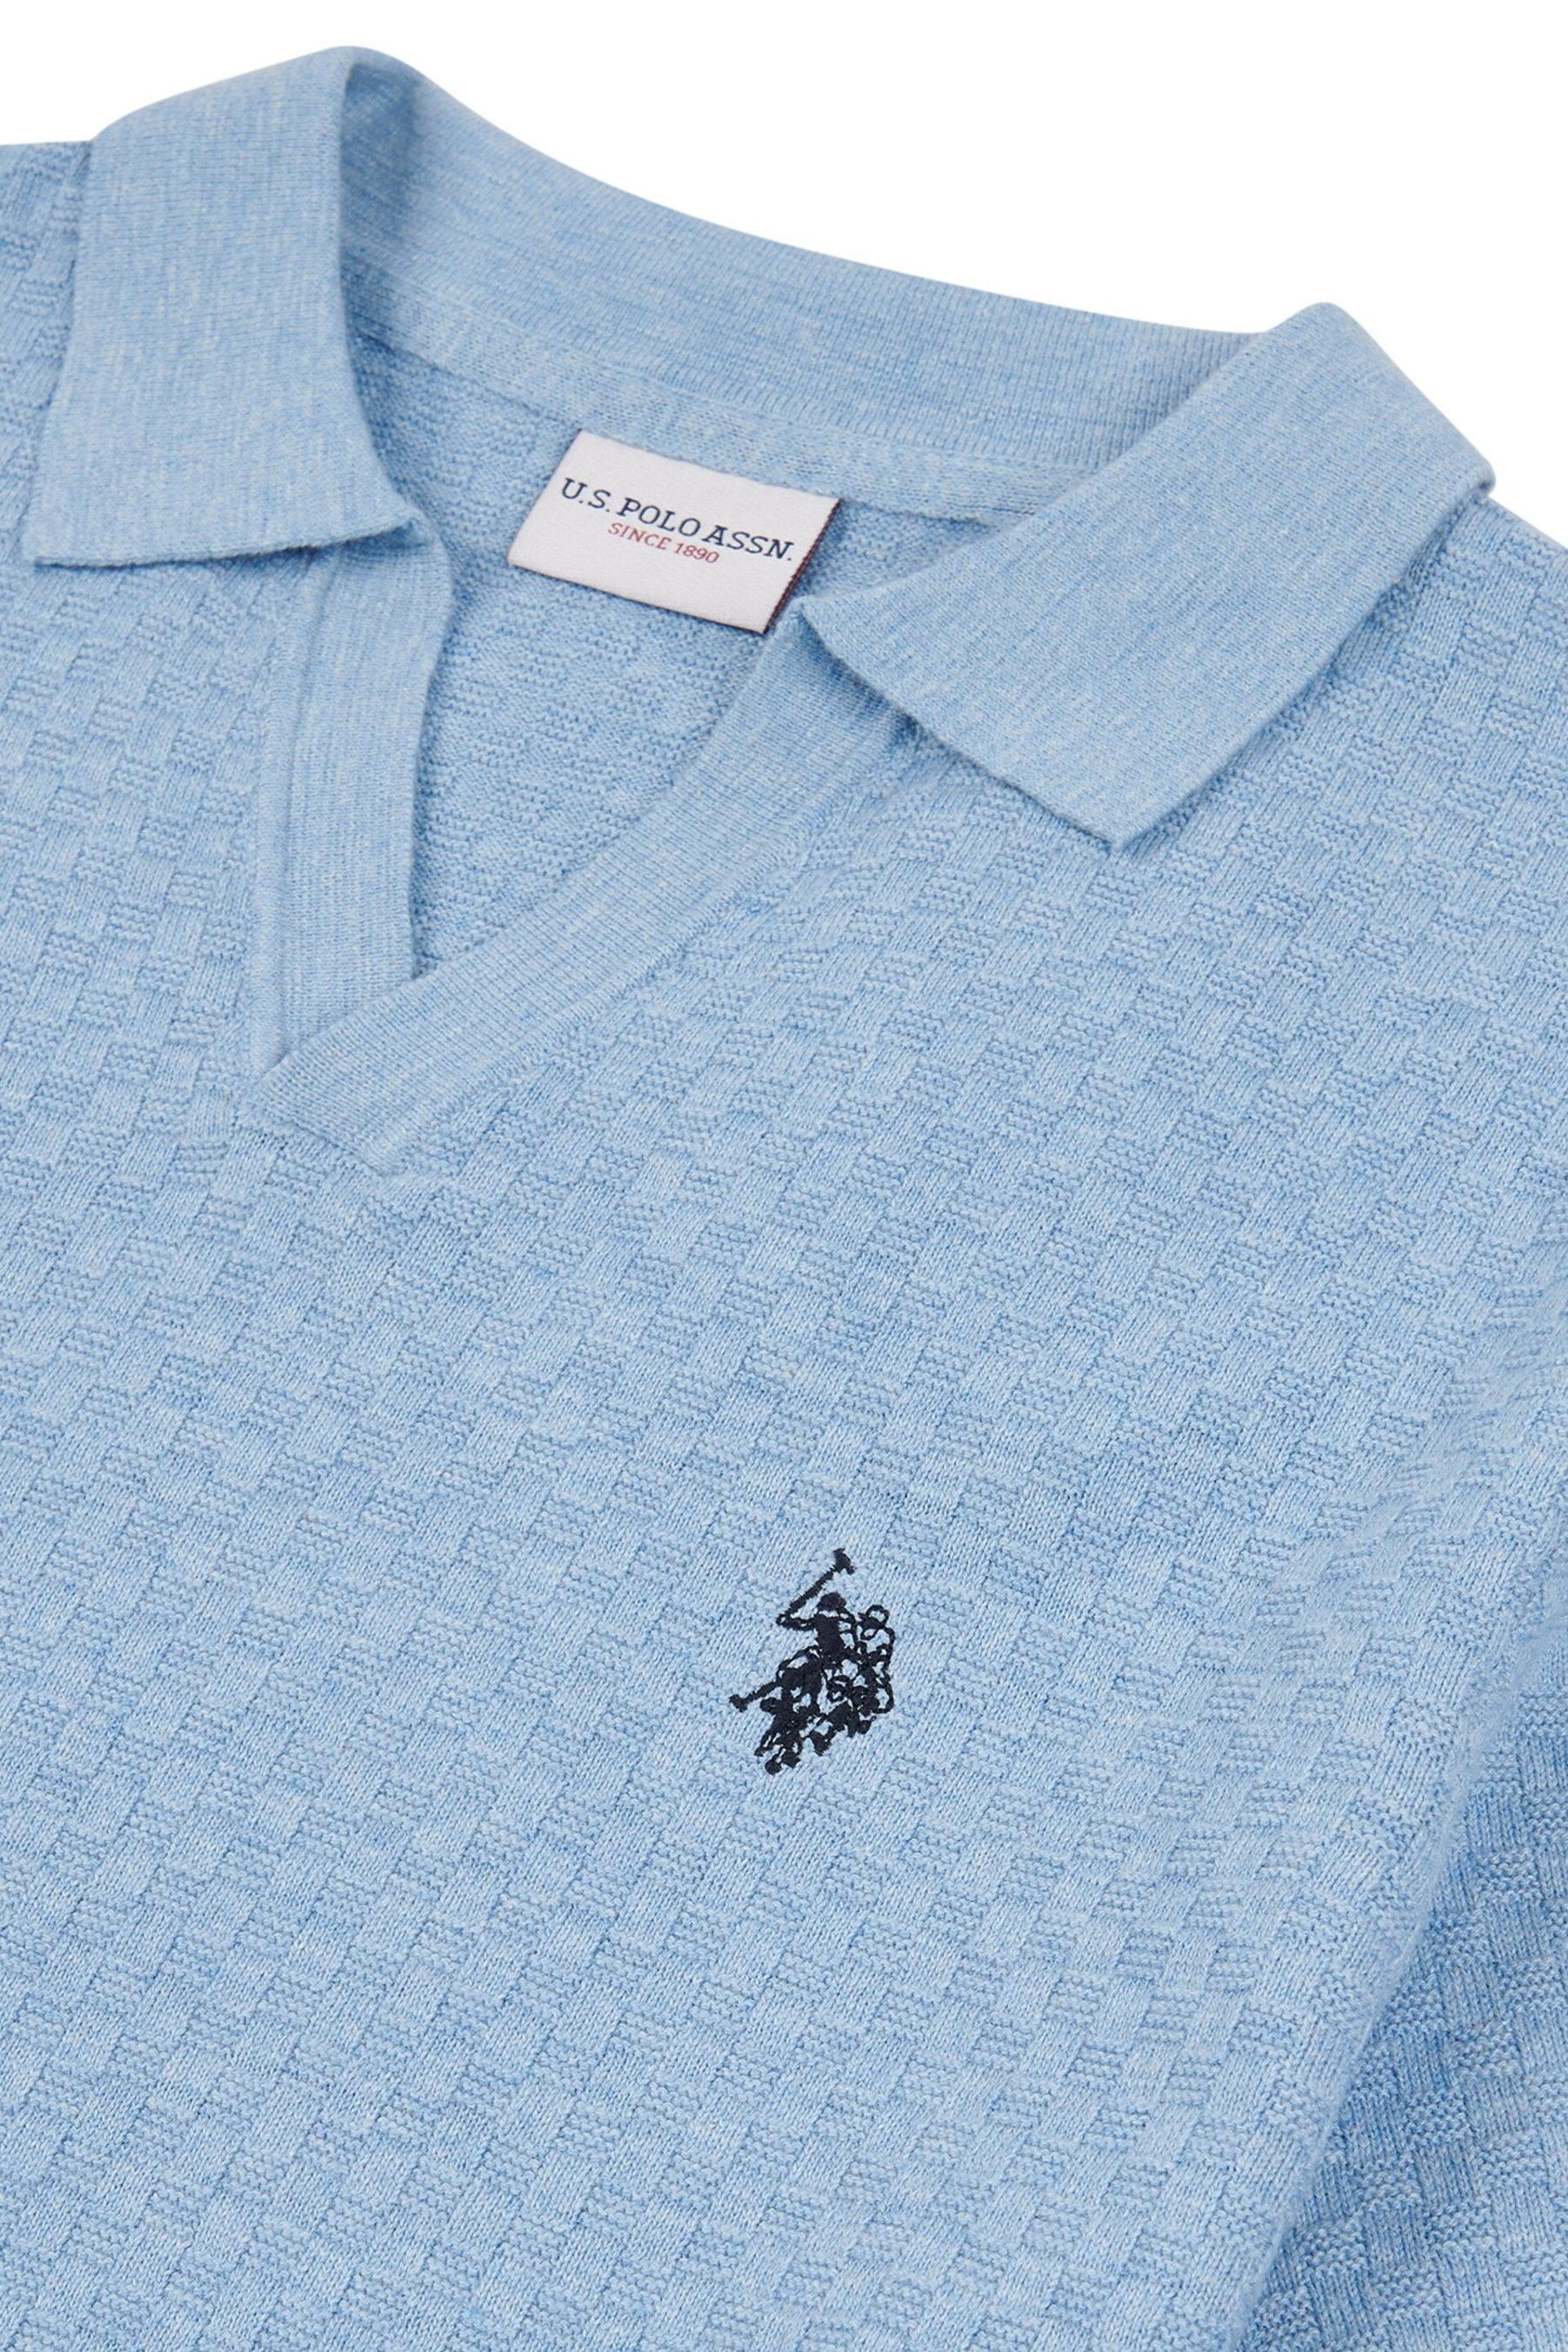 U.S. Polo Assn. Mens Regular Fit Blue Revere Texture Knit Polo Shirt - Image 7 of 7